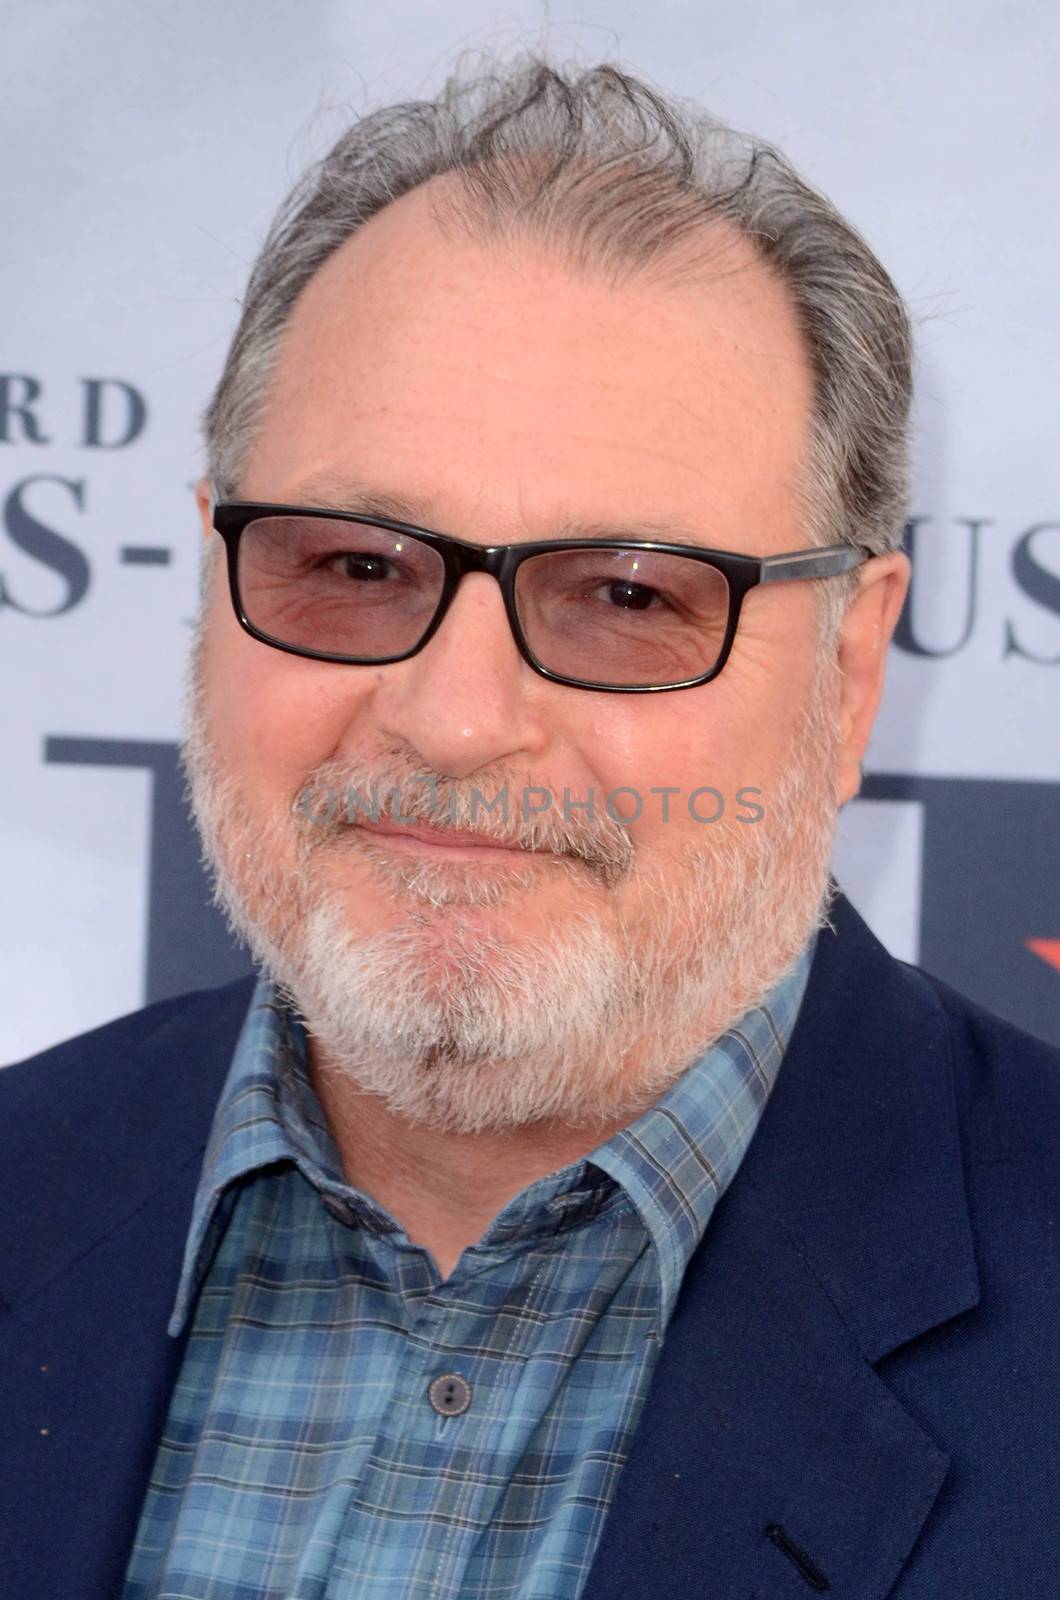 Kevin Dunn
at FYC for HBO's series VEEP 6th Season, Television Academy, North Hollywood, CA 05-25-17/ImageCollect by ImageCollect